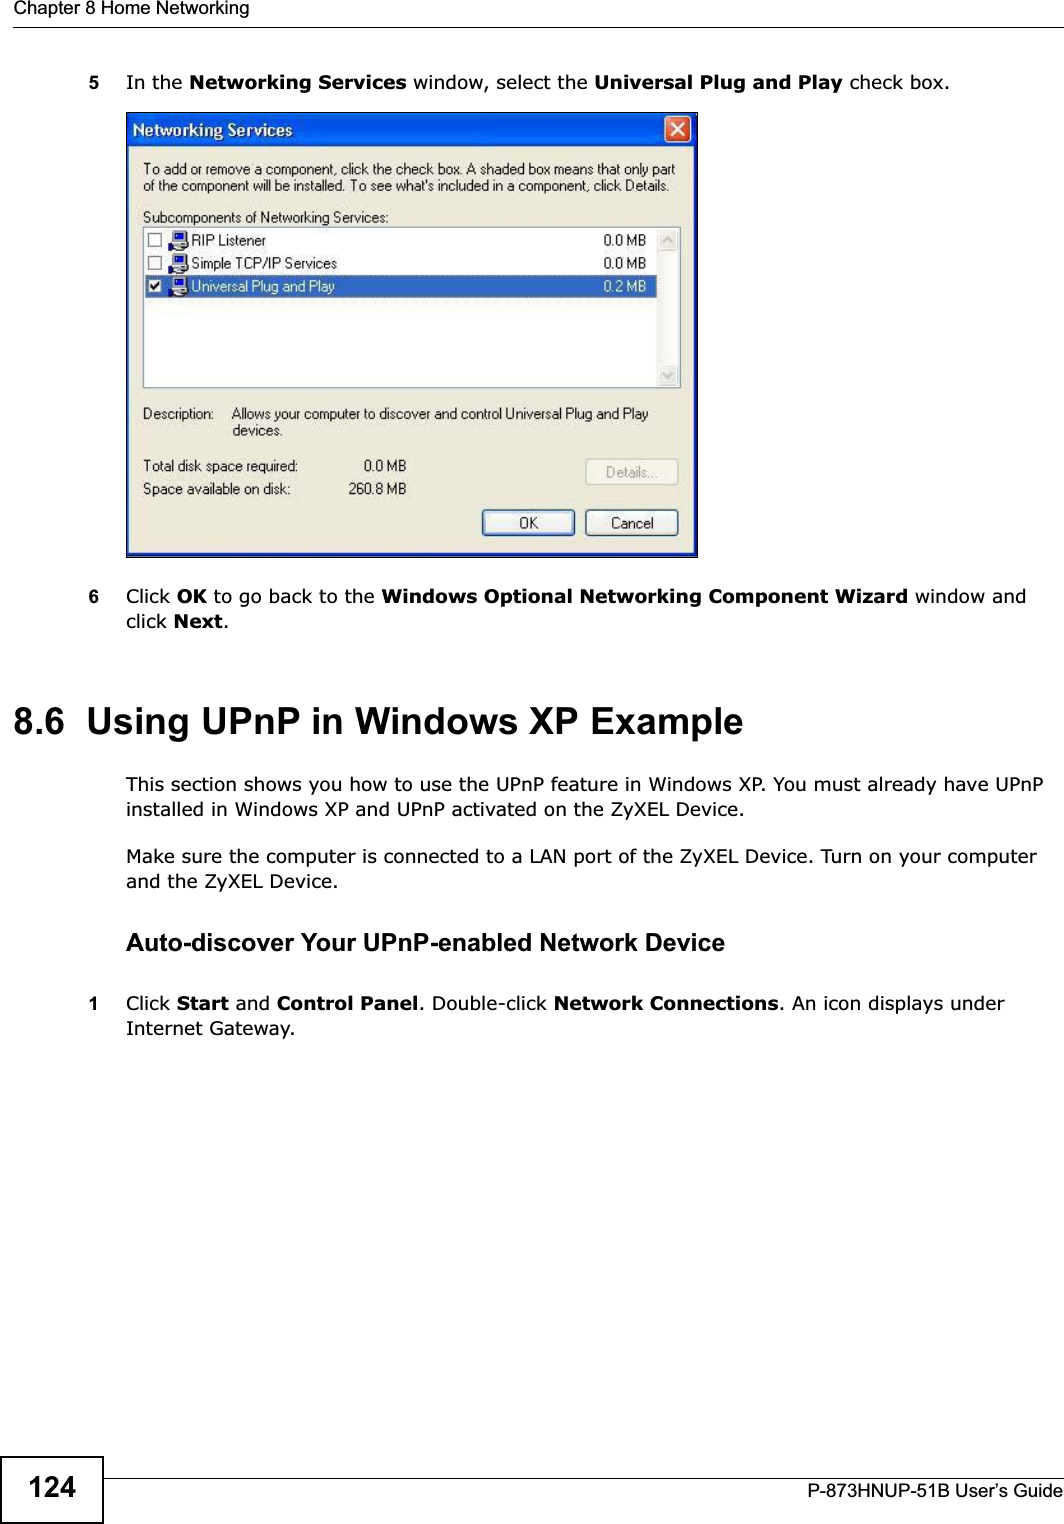 Chapter 8 Home NetworkingP-873HNUP-51B User’s Guide1245In the Networking Services window, select the Universal Plug and Play check box. Networking Services6Click OK to go back to the Windows Optional Networking Component Wizard window and click Next.8.6  Using UPnP in Windows XP ExampleThis section shows you how to use the UPnP feature in Windows XP. You must already have UPnP installed in Windows XP and UPnP activated on the ZyXEL Device.Make sure the computer is connected to a LAN port of the ZyXEL Device. Turn on your computer and the ZyXEL Device. Auto-discover Your UPnP-enabled Network Device1Click Start and Control Panel. Double-click Network Connections. An icon displays under Internet Gateway.